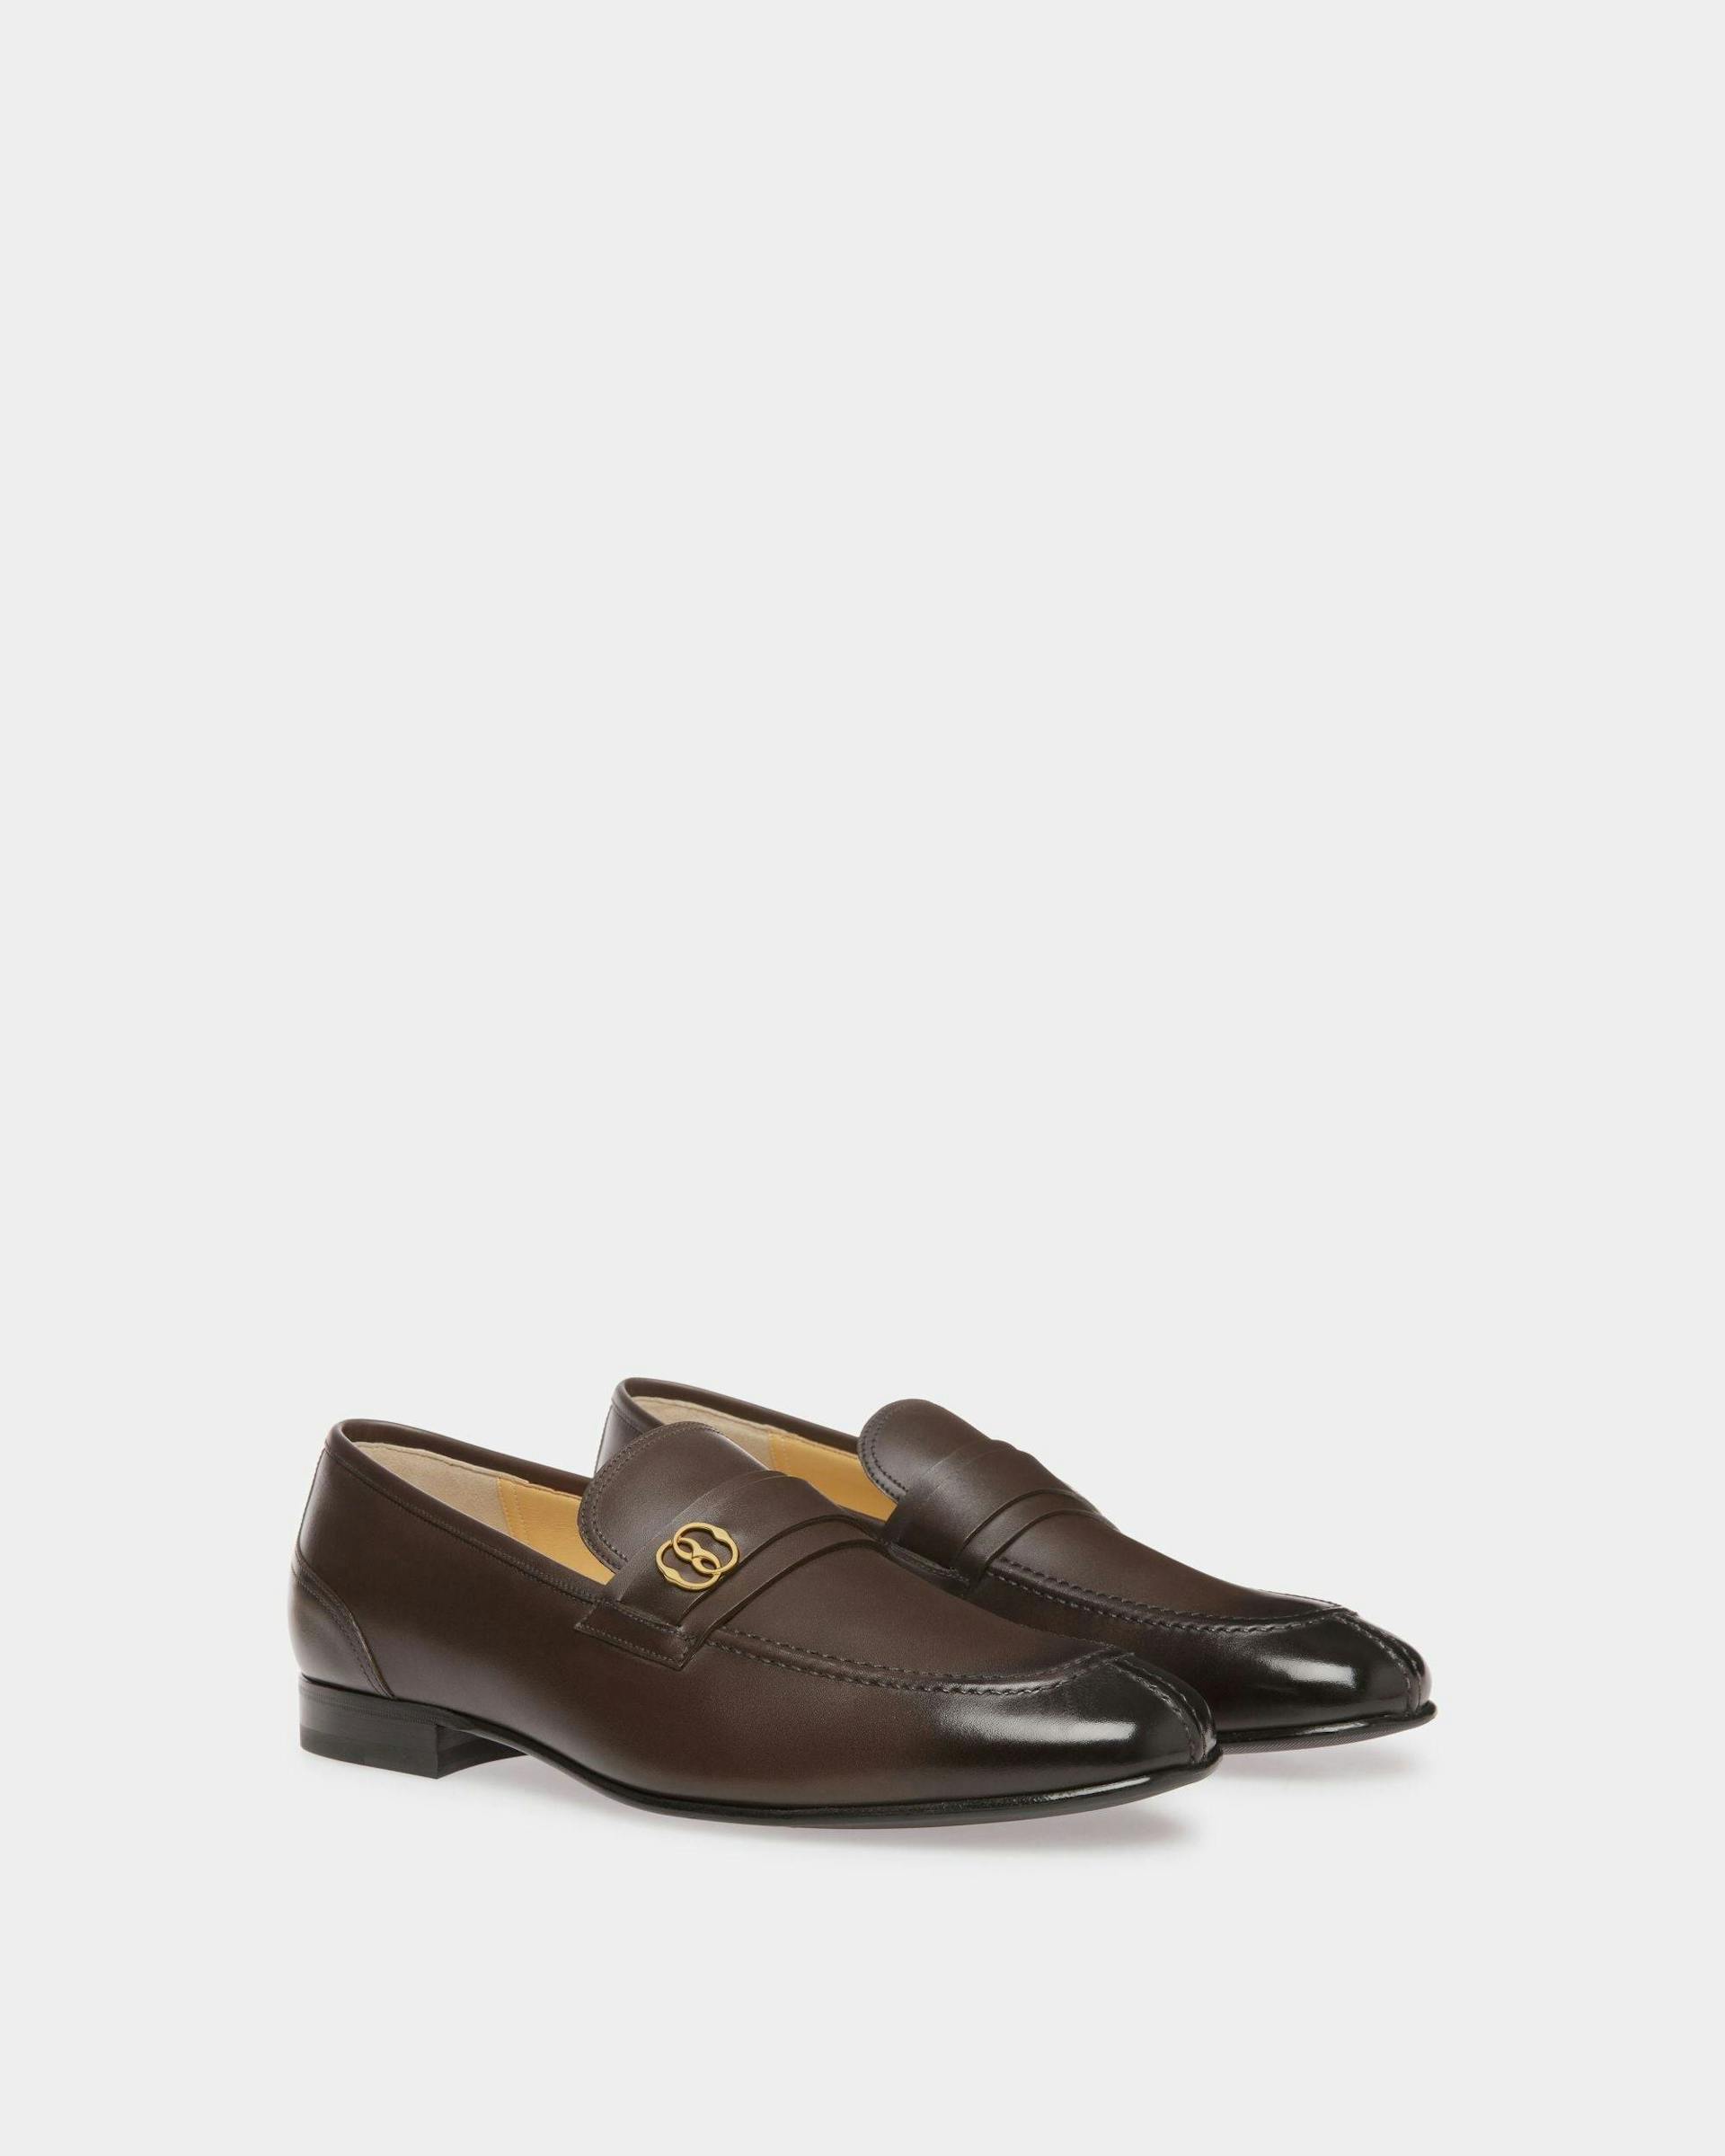 Men's Suisse Loafers In Brown Leather | Bally | Still Life 3/4 Front